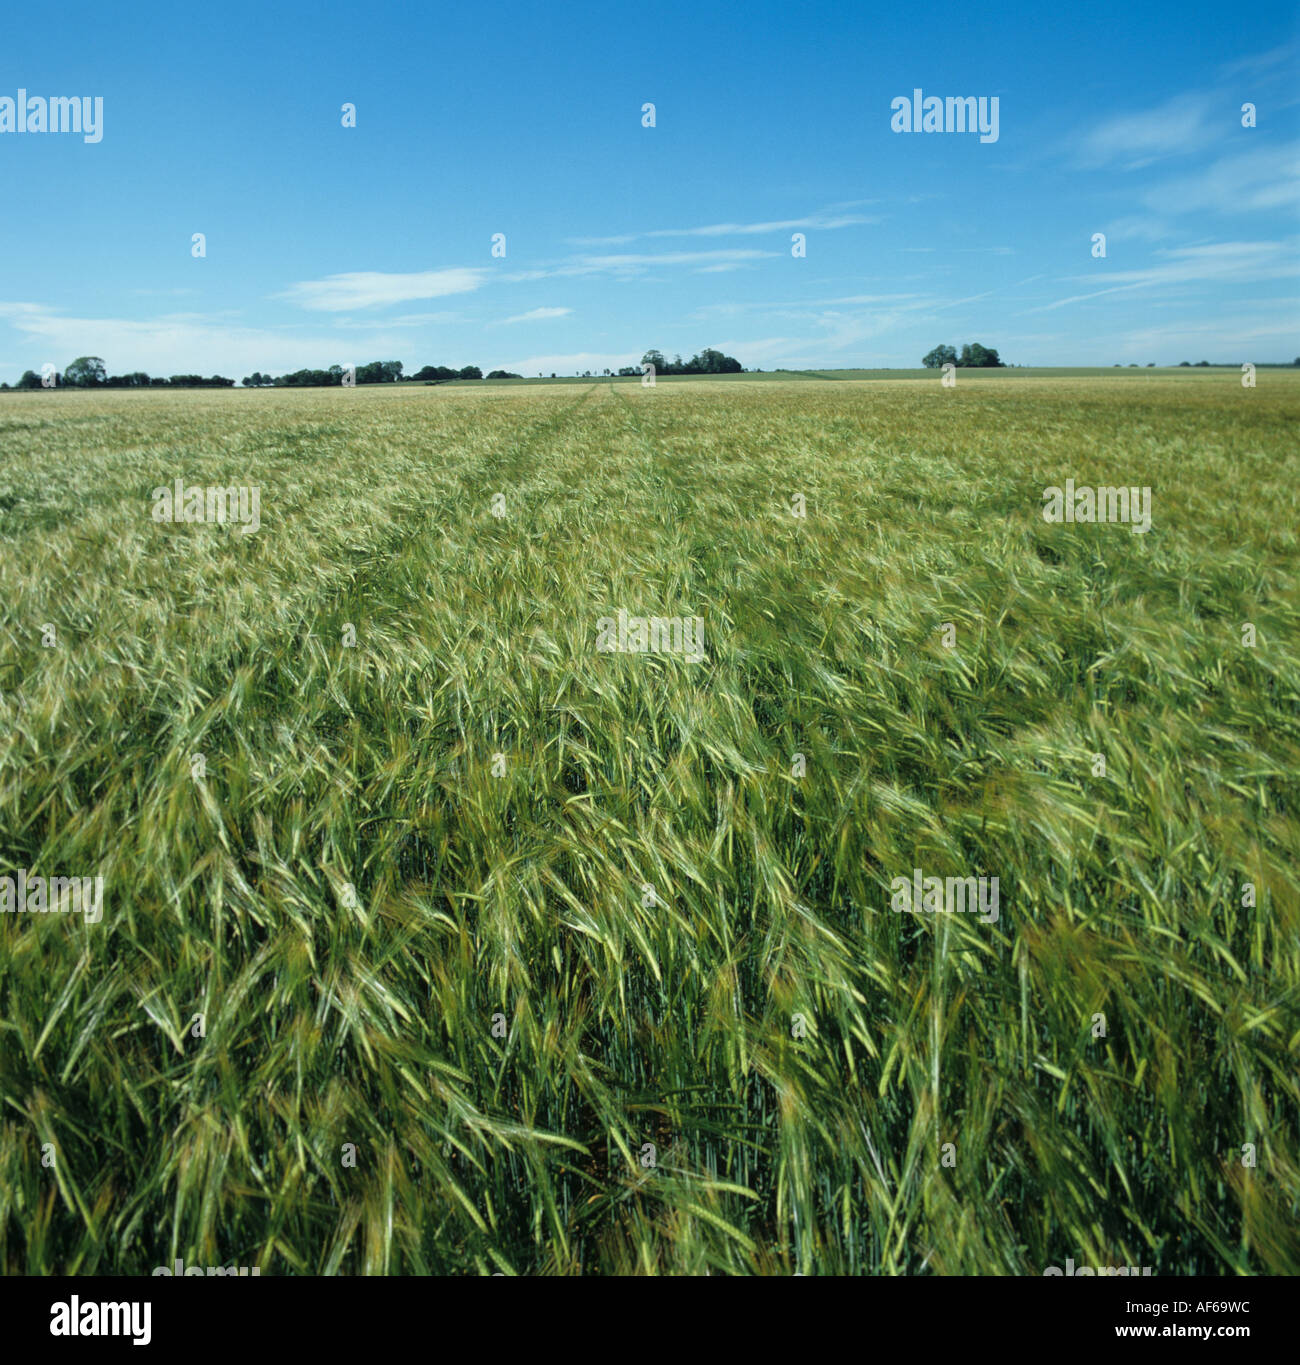 View of good barley crop in green ear in a large downland field Stock Photo